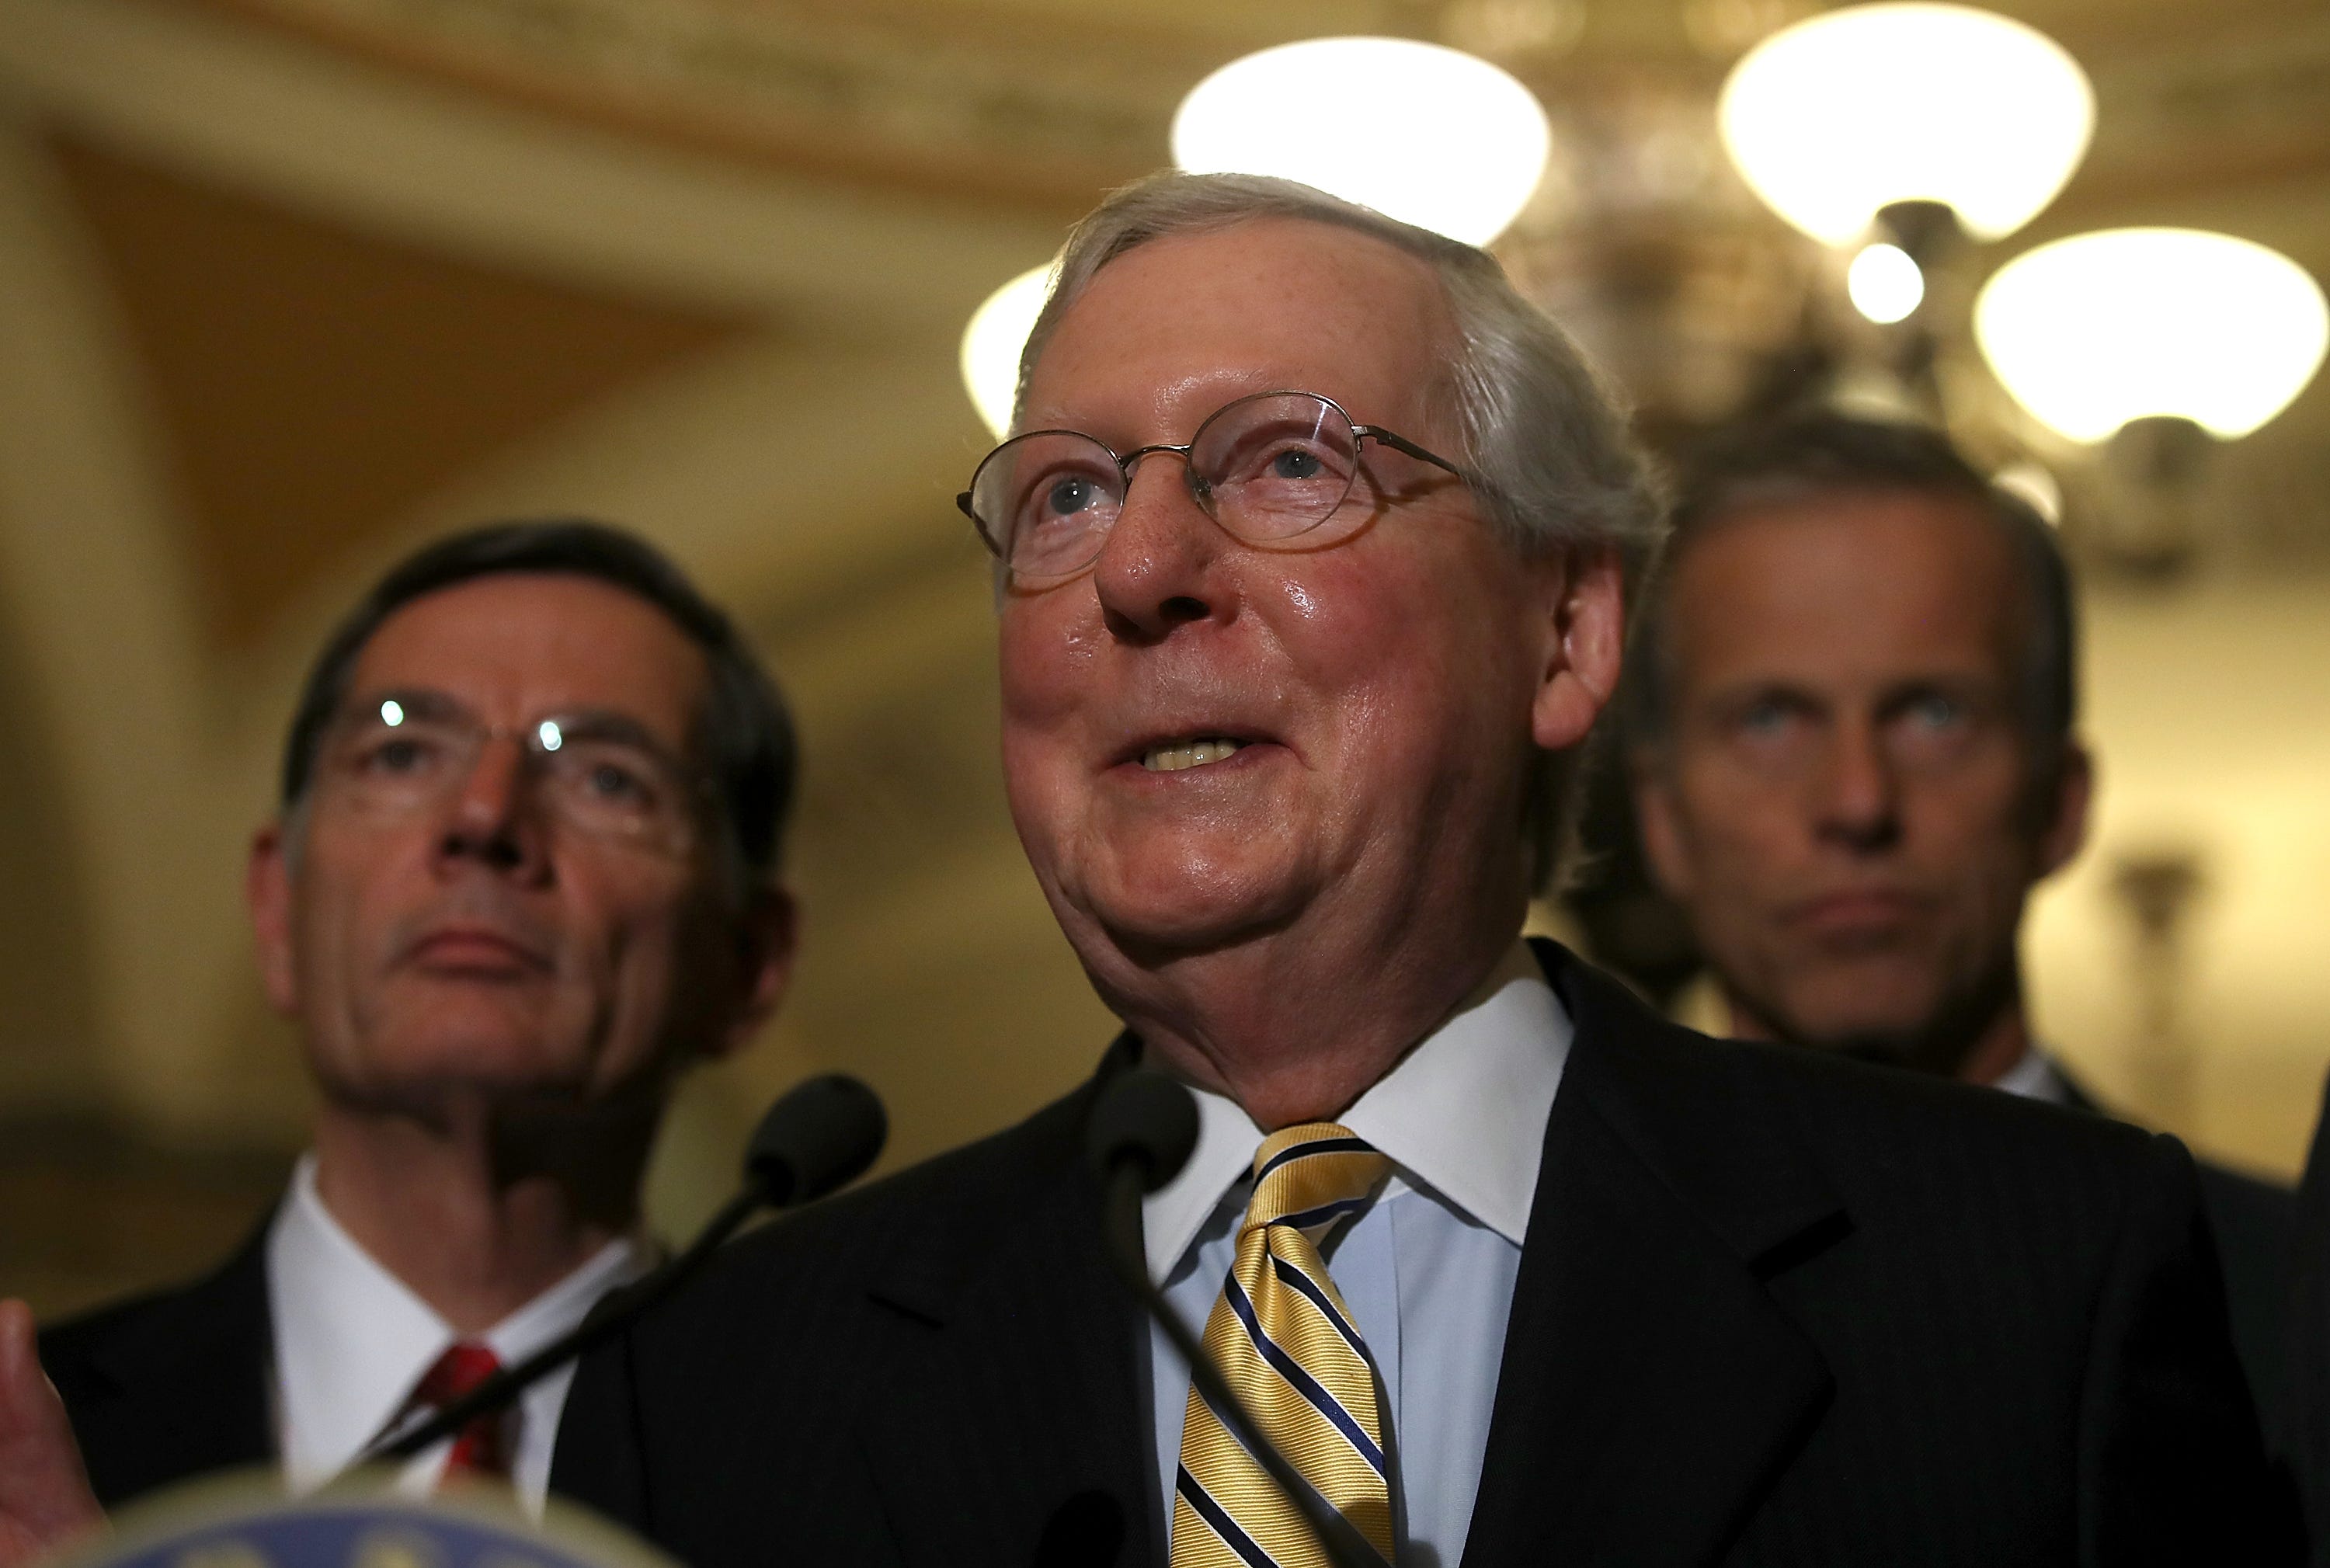 Senate Republicans clear key hurdle on Obamacare repeal, but the hard part is still ahead